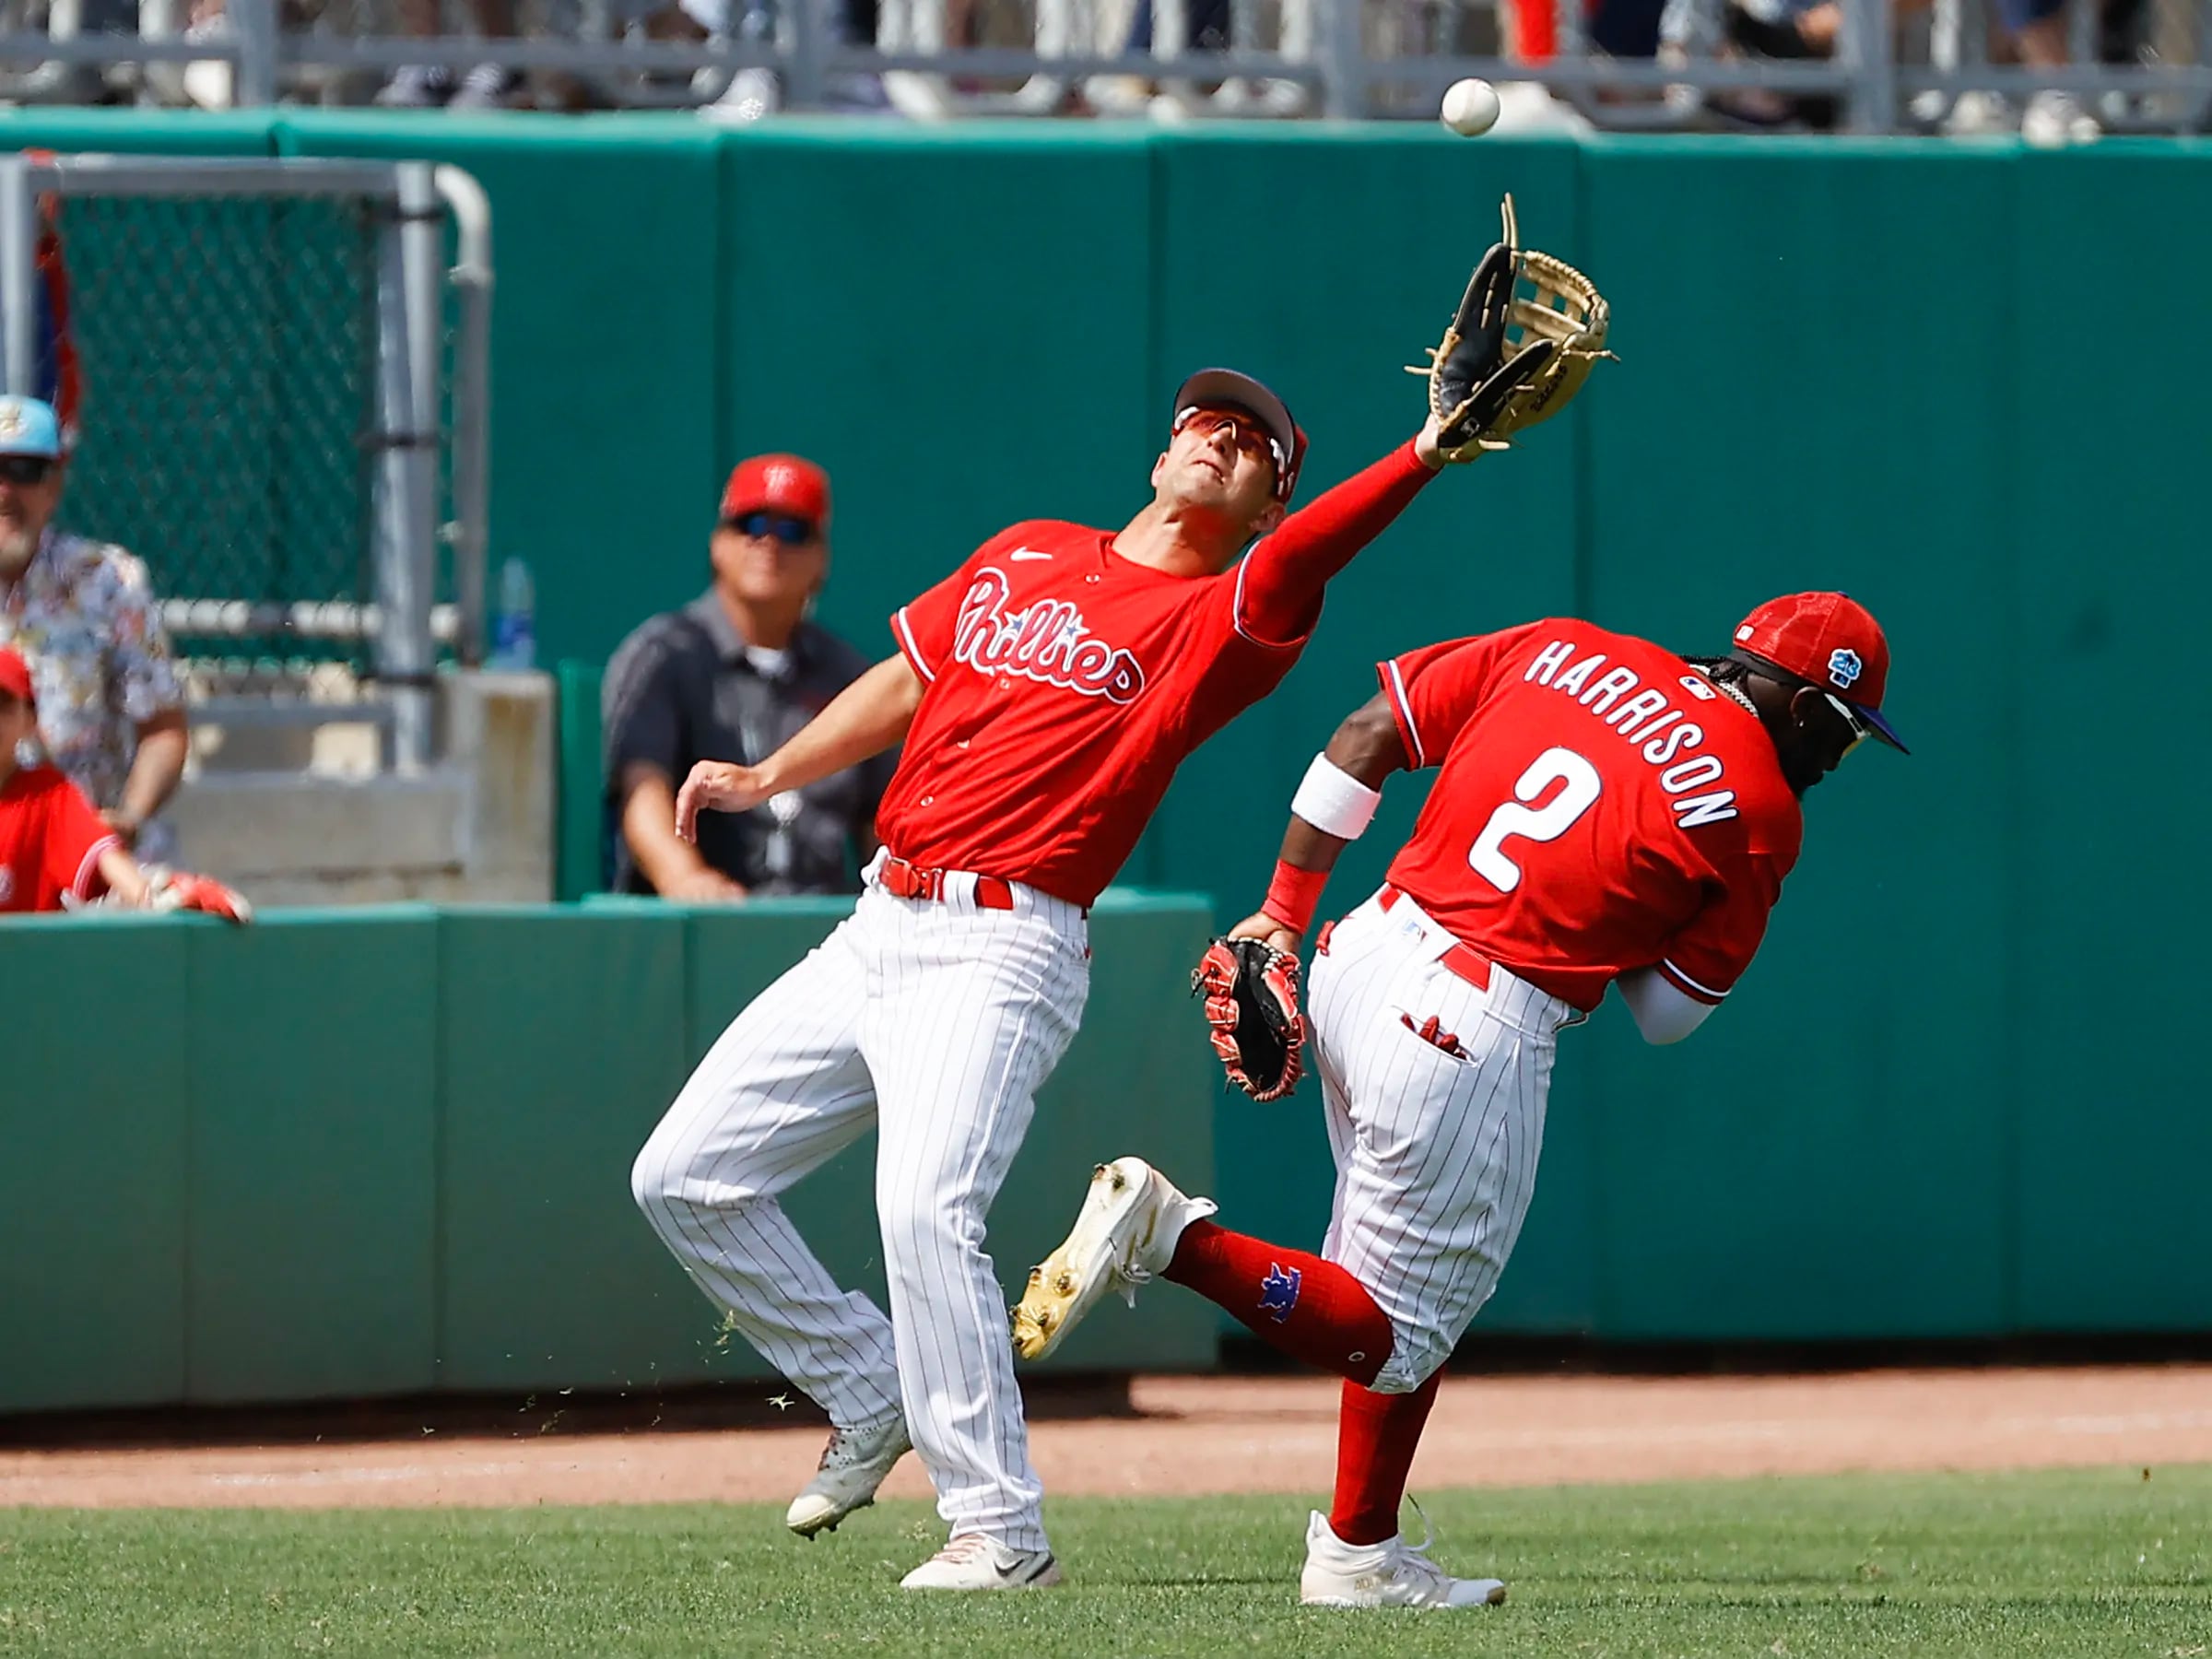 Photos from the Phillies spring training game win over the Pirates